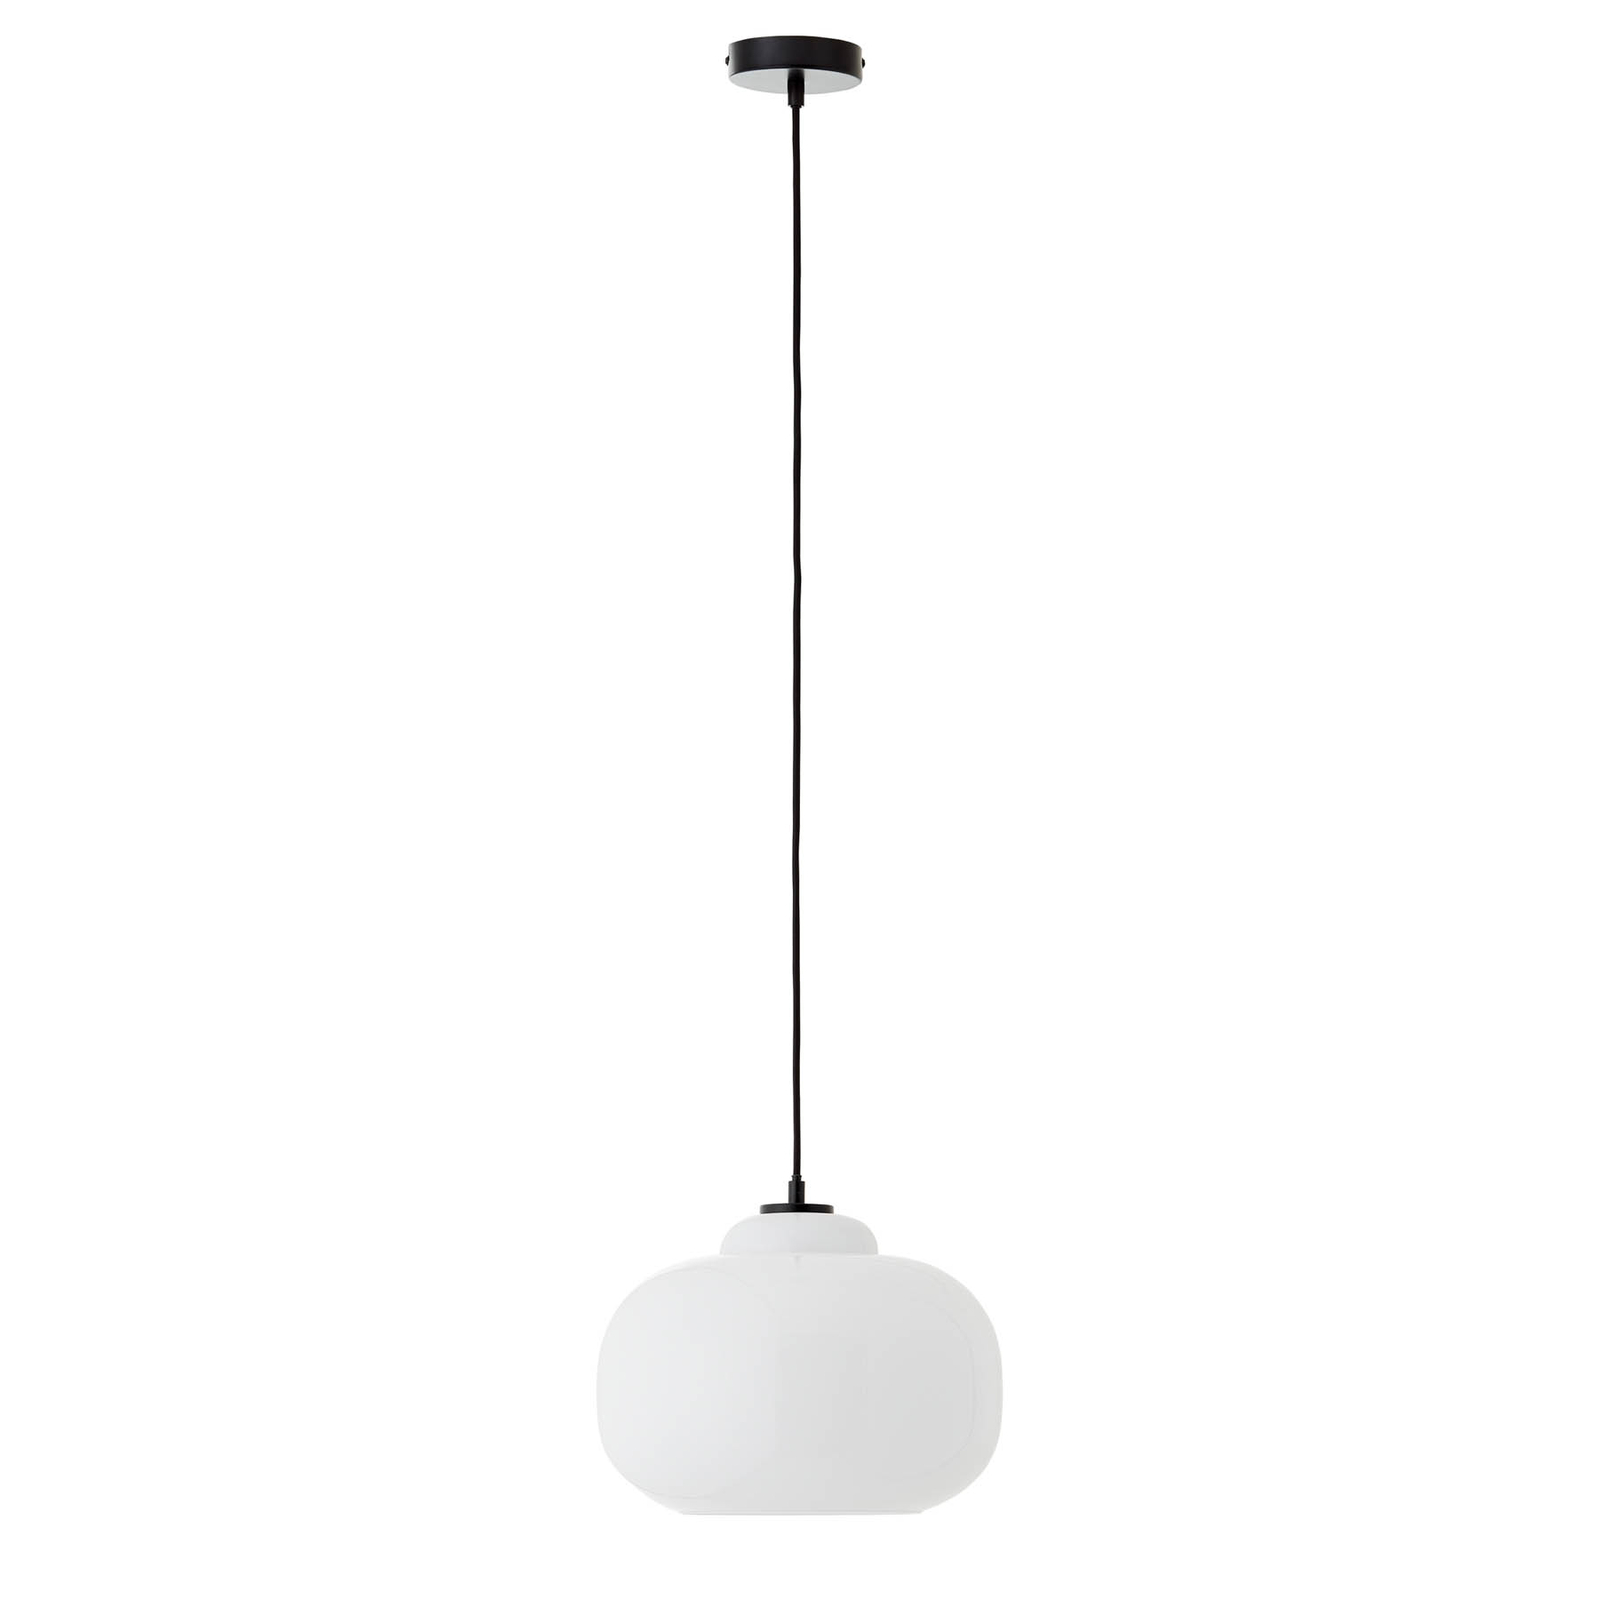 Blop hanging light made of glass, white